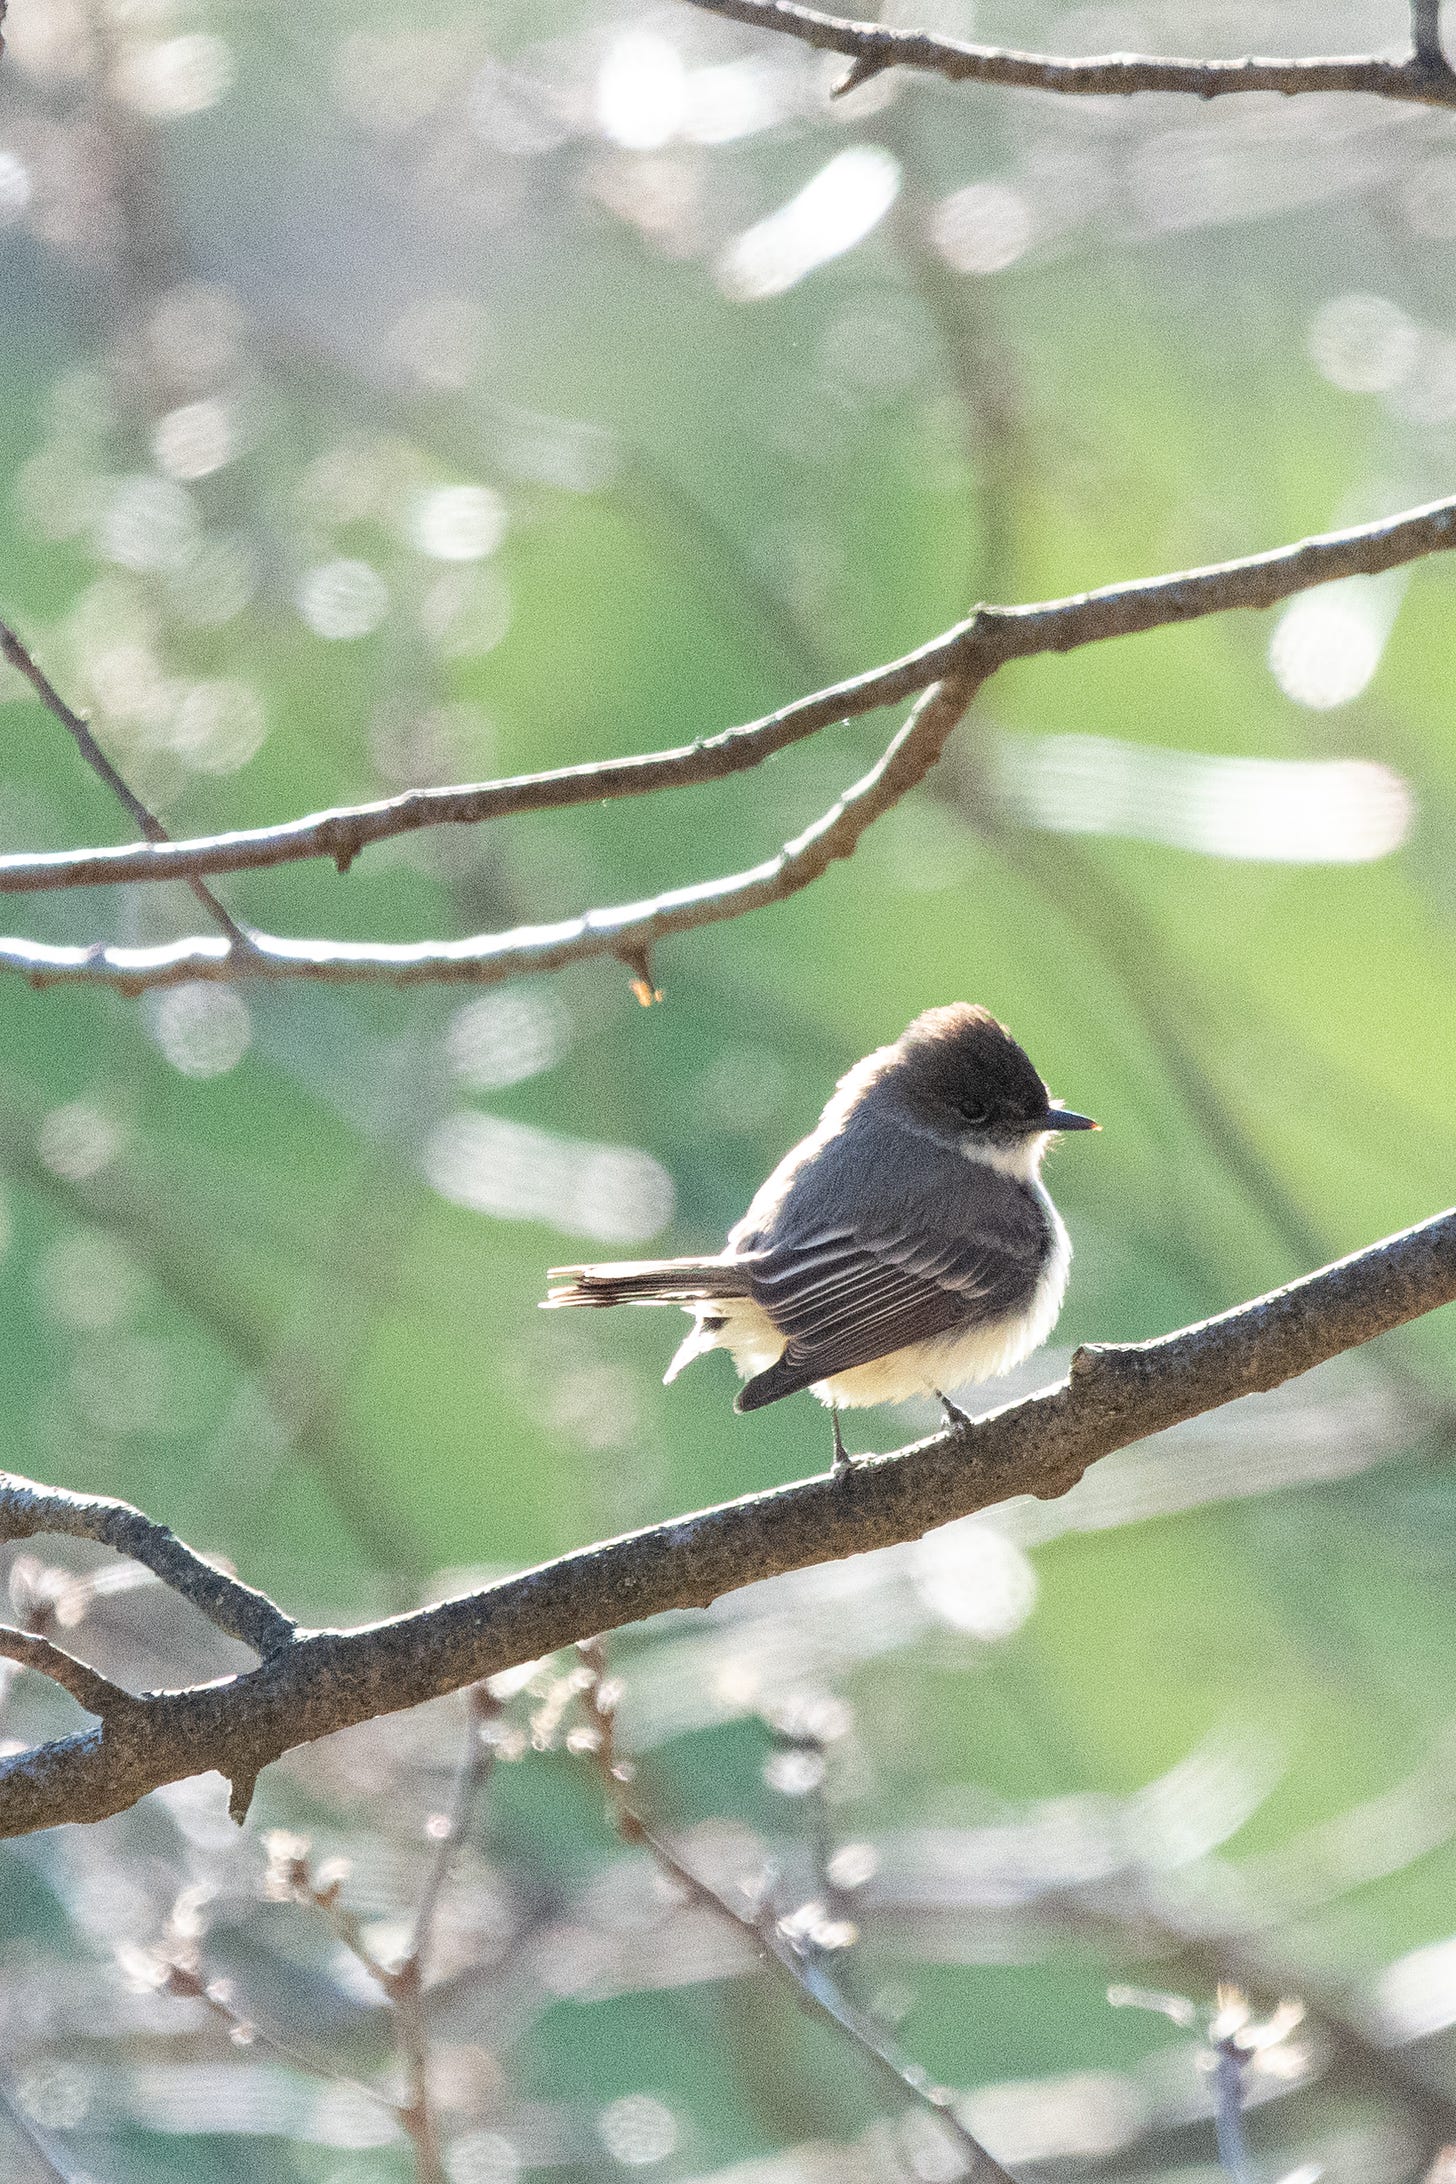 An eastern phoebe, looking back over its shoulder at the camera, perched in bare branches